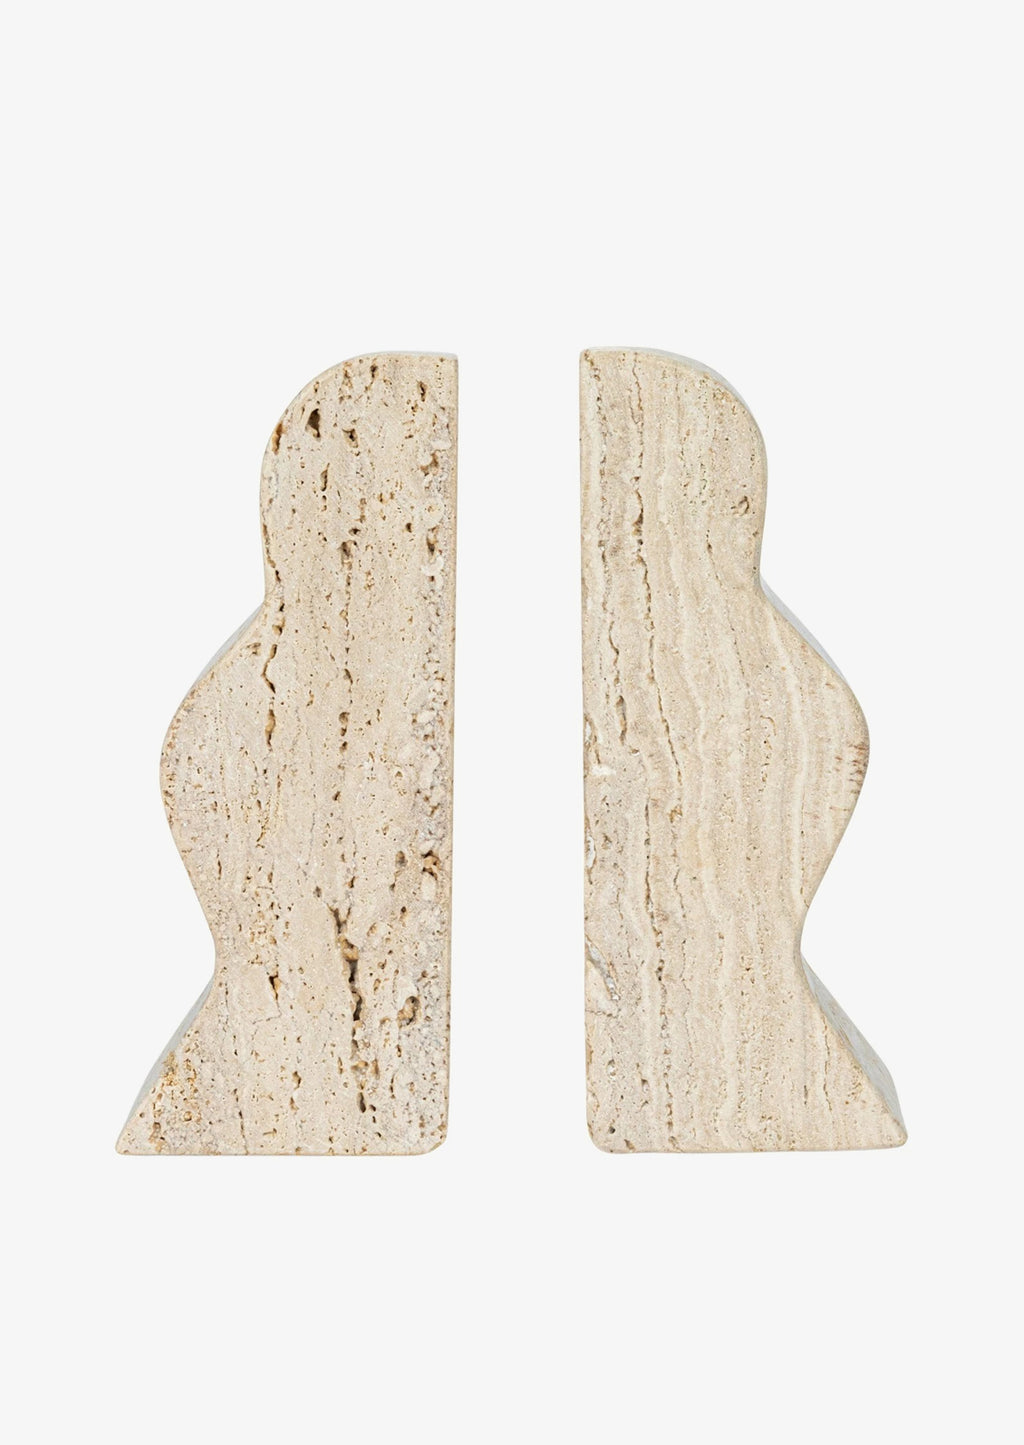 2: A pair of natural travertine bookends with wavy squiggle shape.